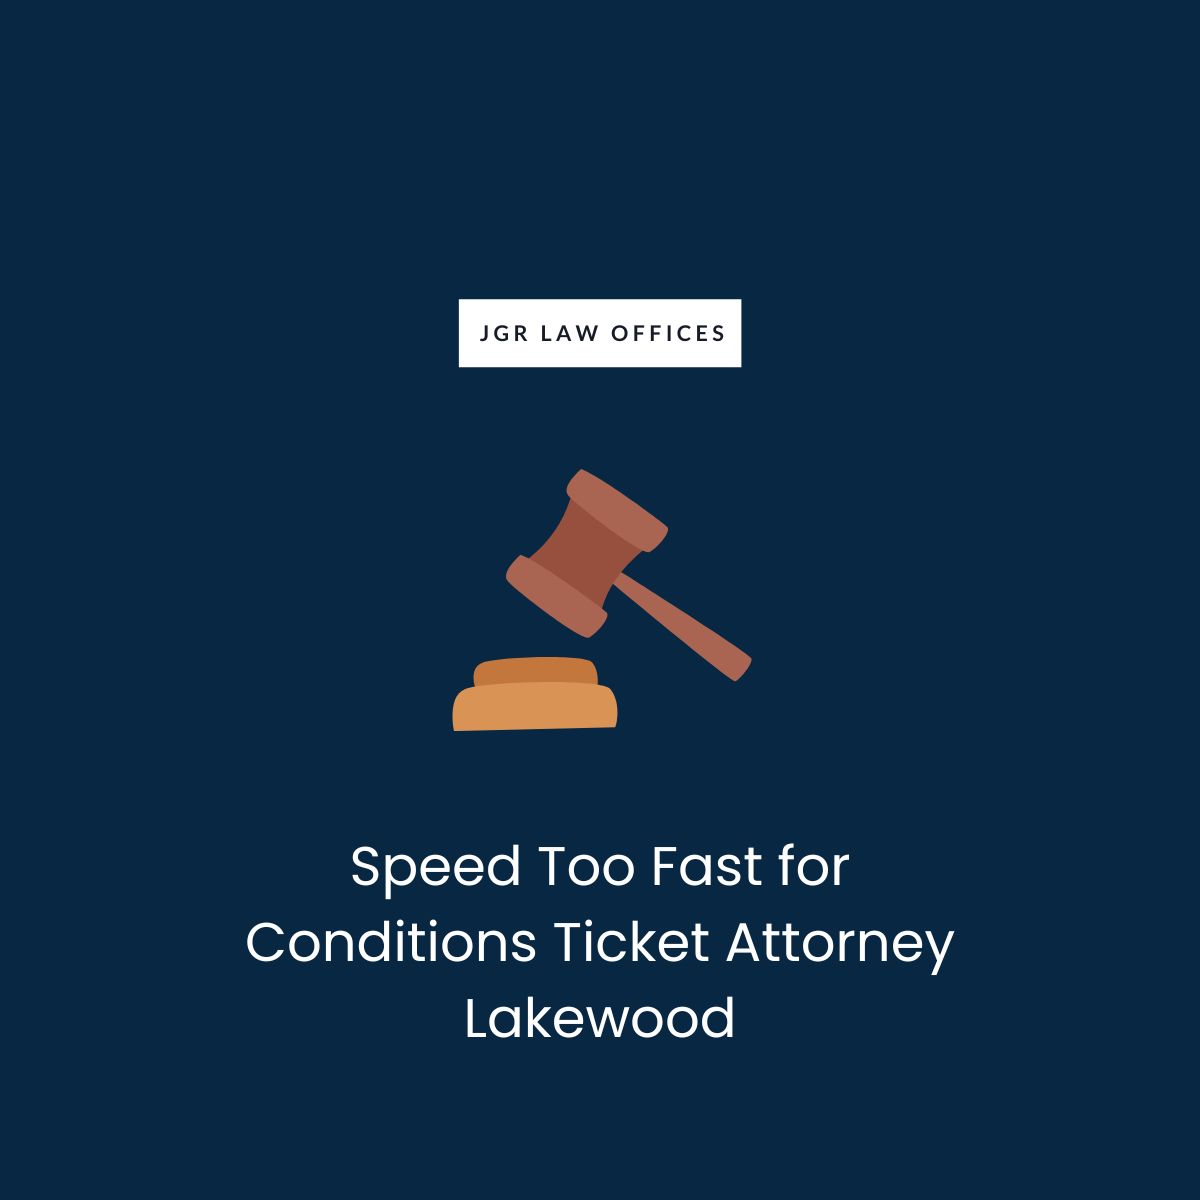 Speed Too Fast for Conditions Ticket Attorney Lakewood